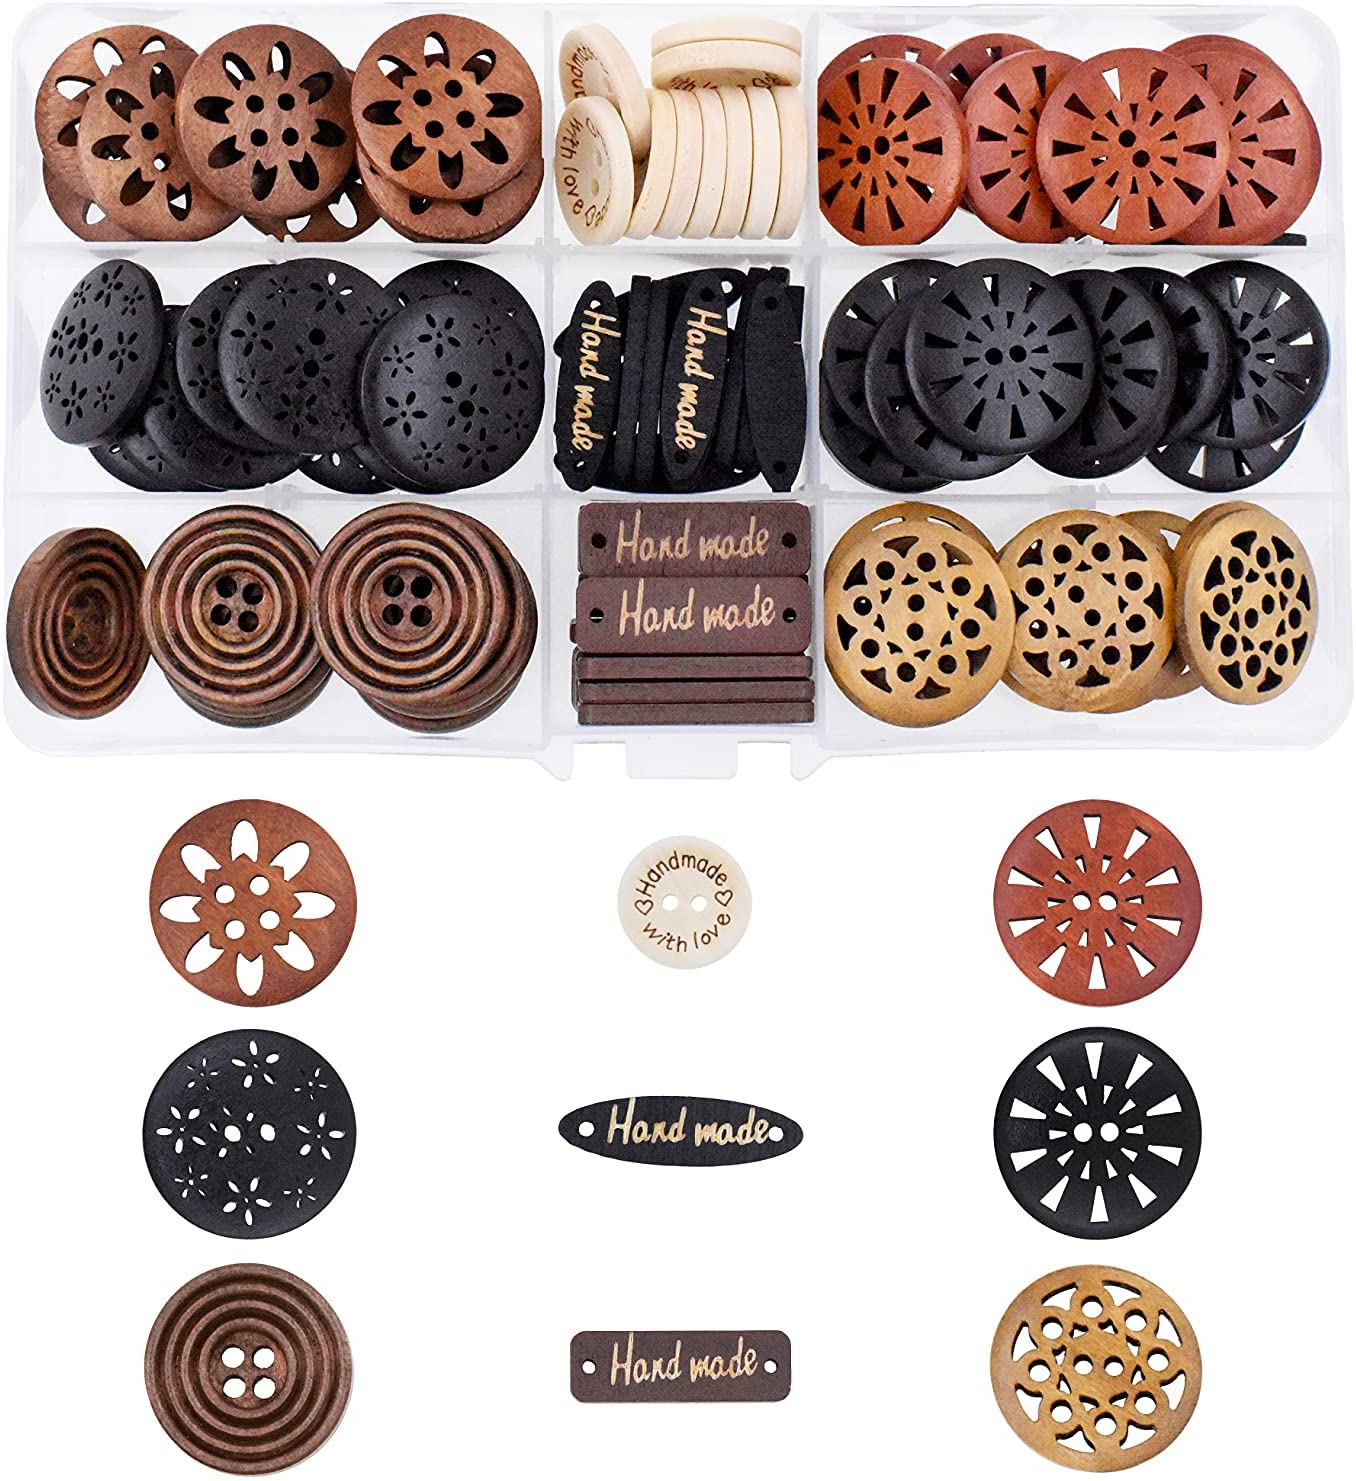 Wooden Buttons - Round Wood Buttons for Crafts Sewing Sweater by Mandala  Crafts, Natural Color Bulk 20 PCs 50mm 2 Inch Button with 4 Holes 